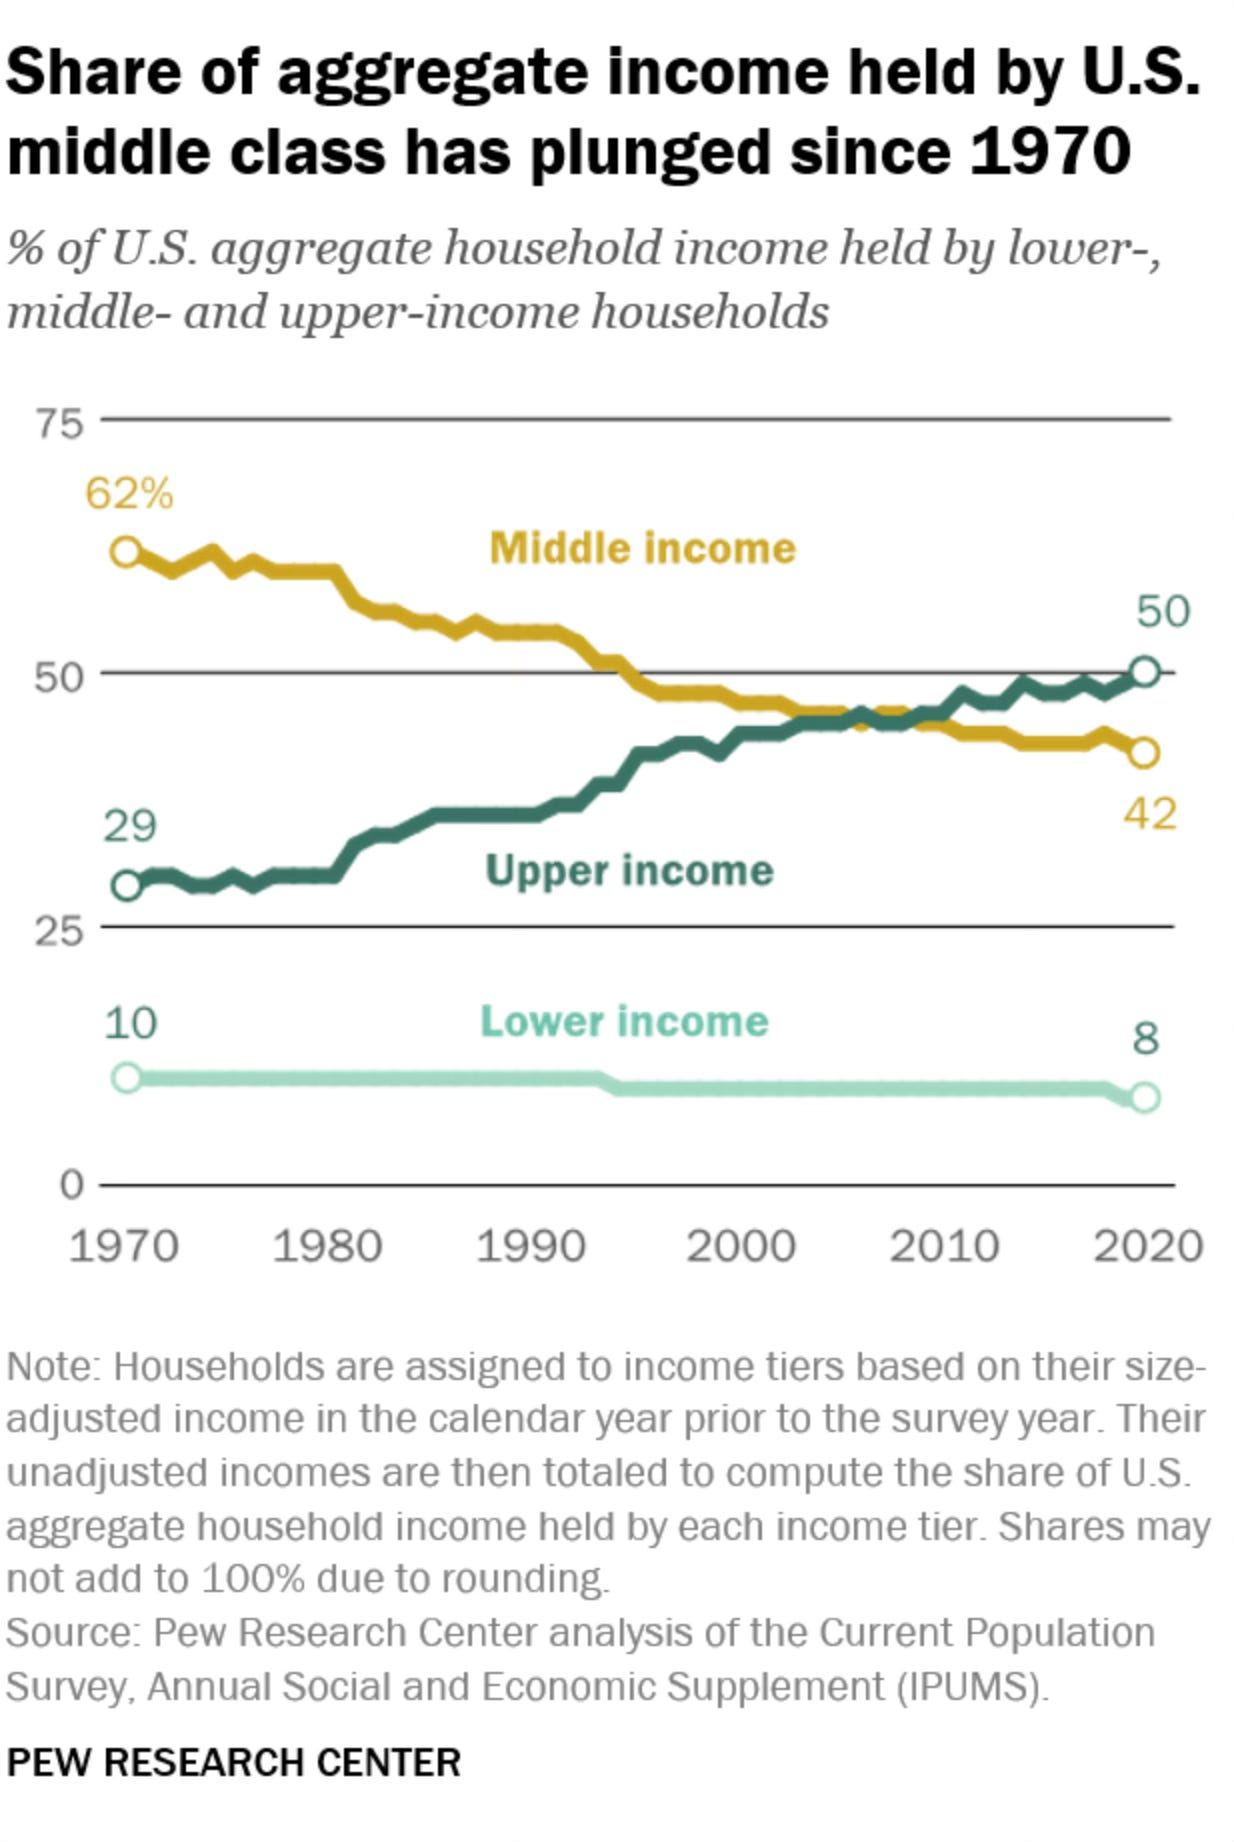 Pew Research share of aggregate income of middle class